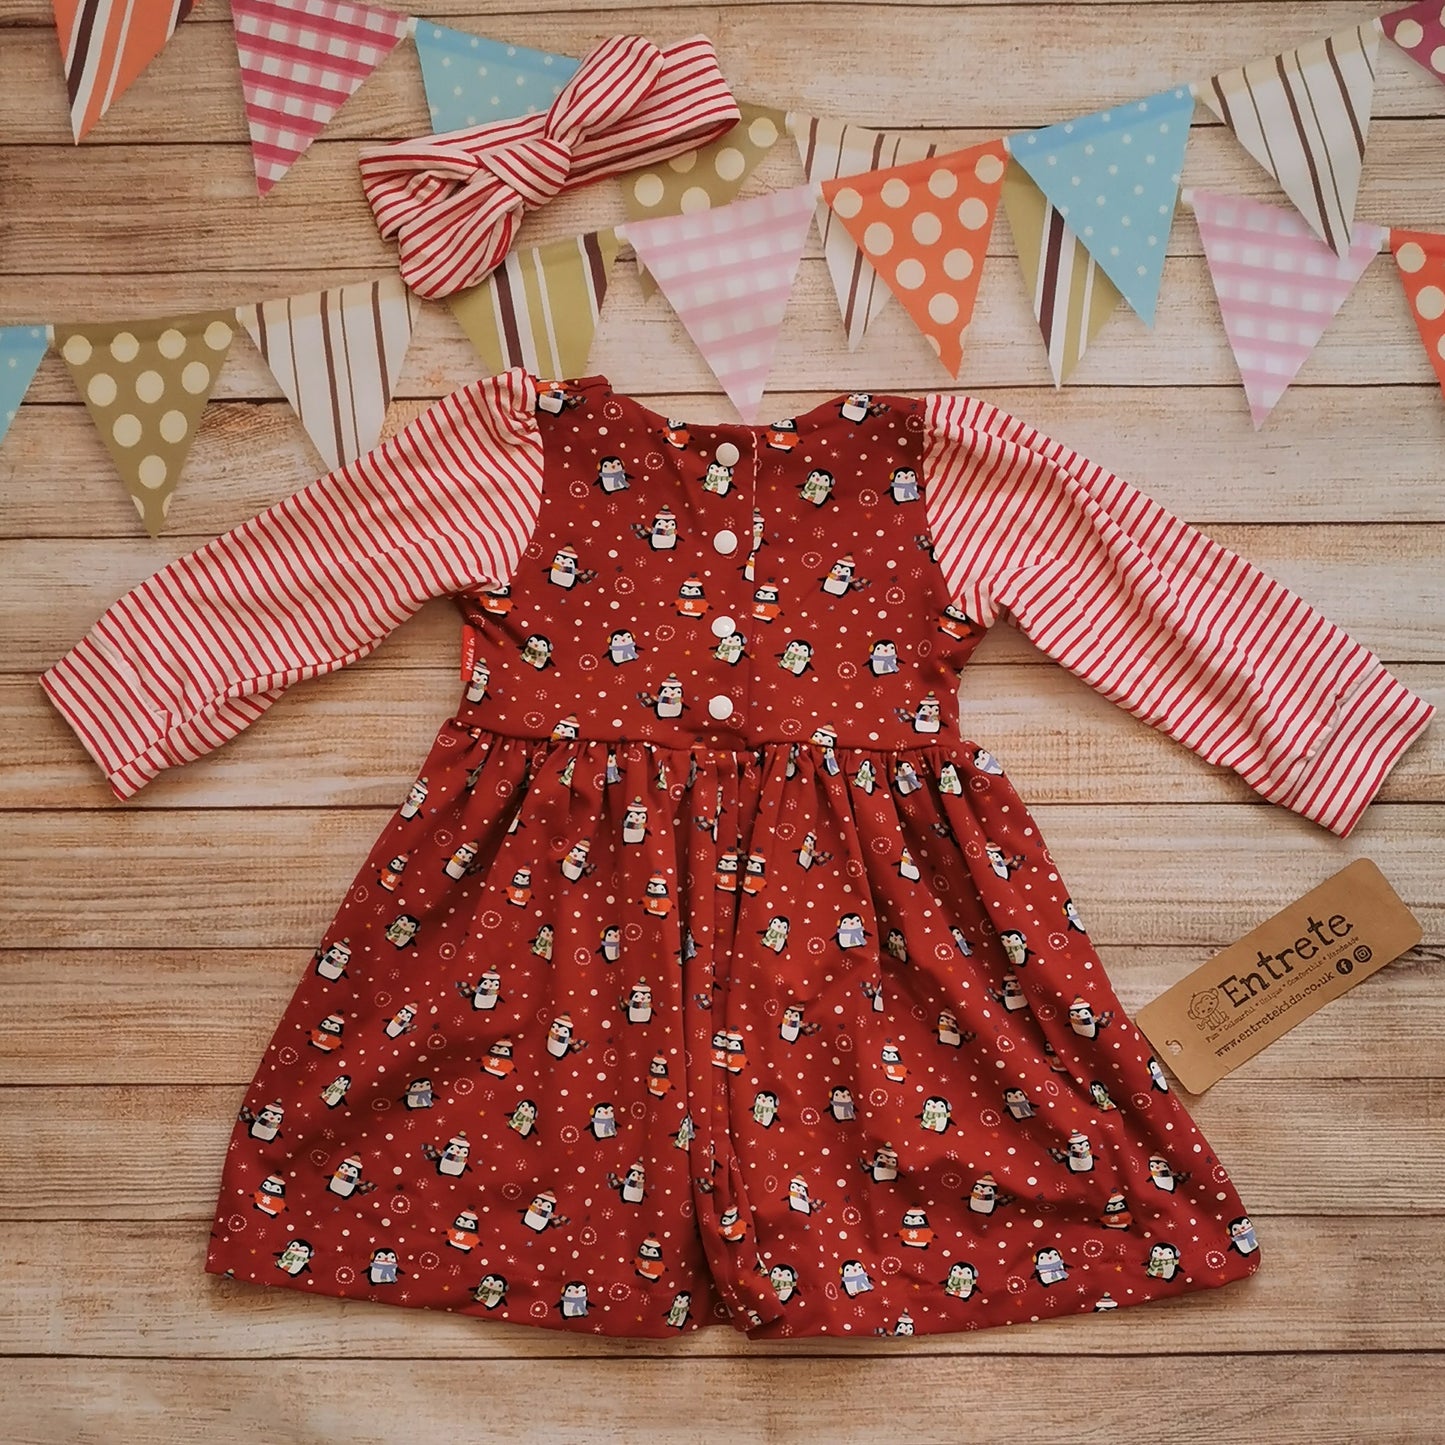 Rear view of a contrasting girls Christmas dress. Handmade using festive red penguins cotton jersey with contrasting red striped cotton jersey arms. Shown with a red striped headband (sold separately).